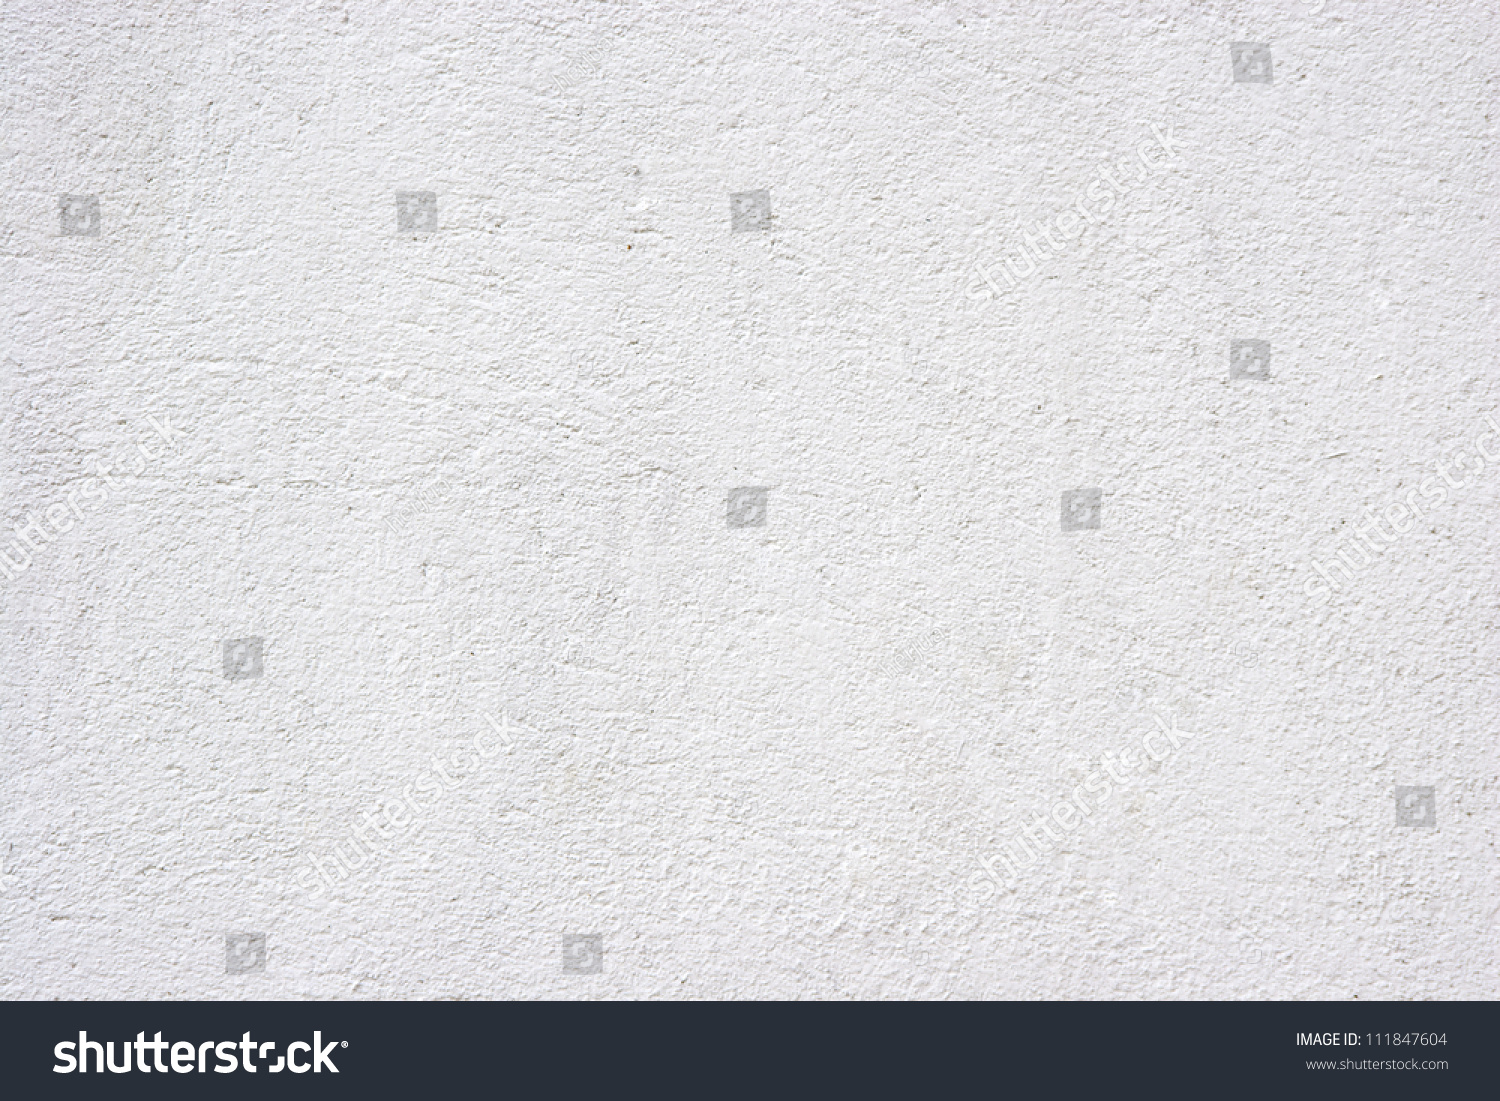 Background Stone Wall Texture Weathered Wall Stock Photo 111847604 ...